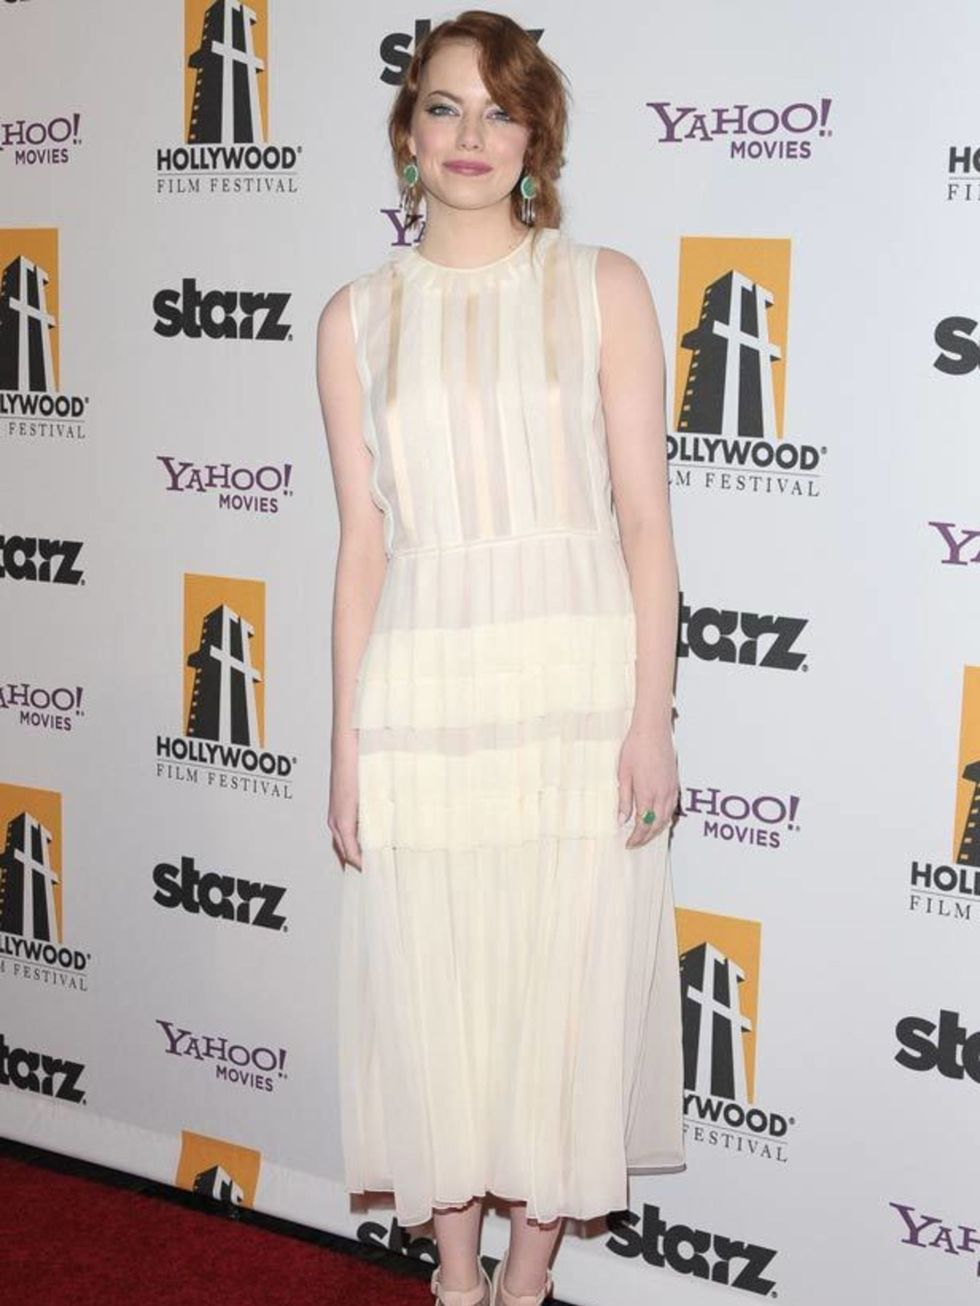 <p><a href="http://cms.elleuk.com/content/search?SearchText=emma+stone+style+file&amp;SearchButton=Search">Emma Stone</a> in <a href="http://www.elleuk.com/catwalk/collections/jonathan-saunders/">Jonathan Saunders</a> at the 15th Annual Hollywood Film Awa